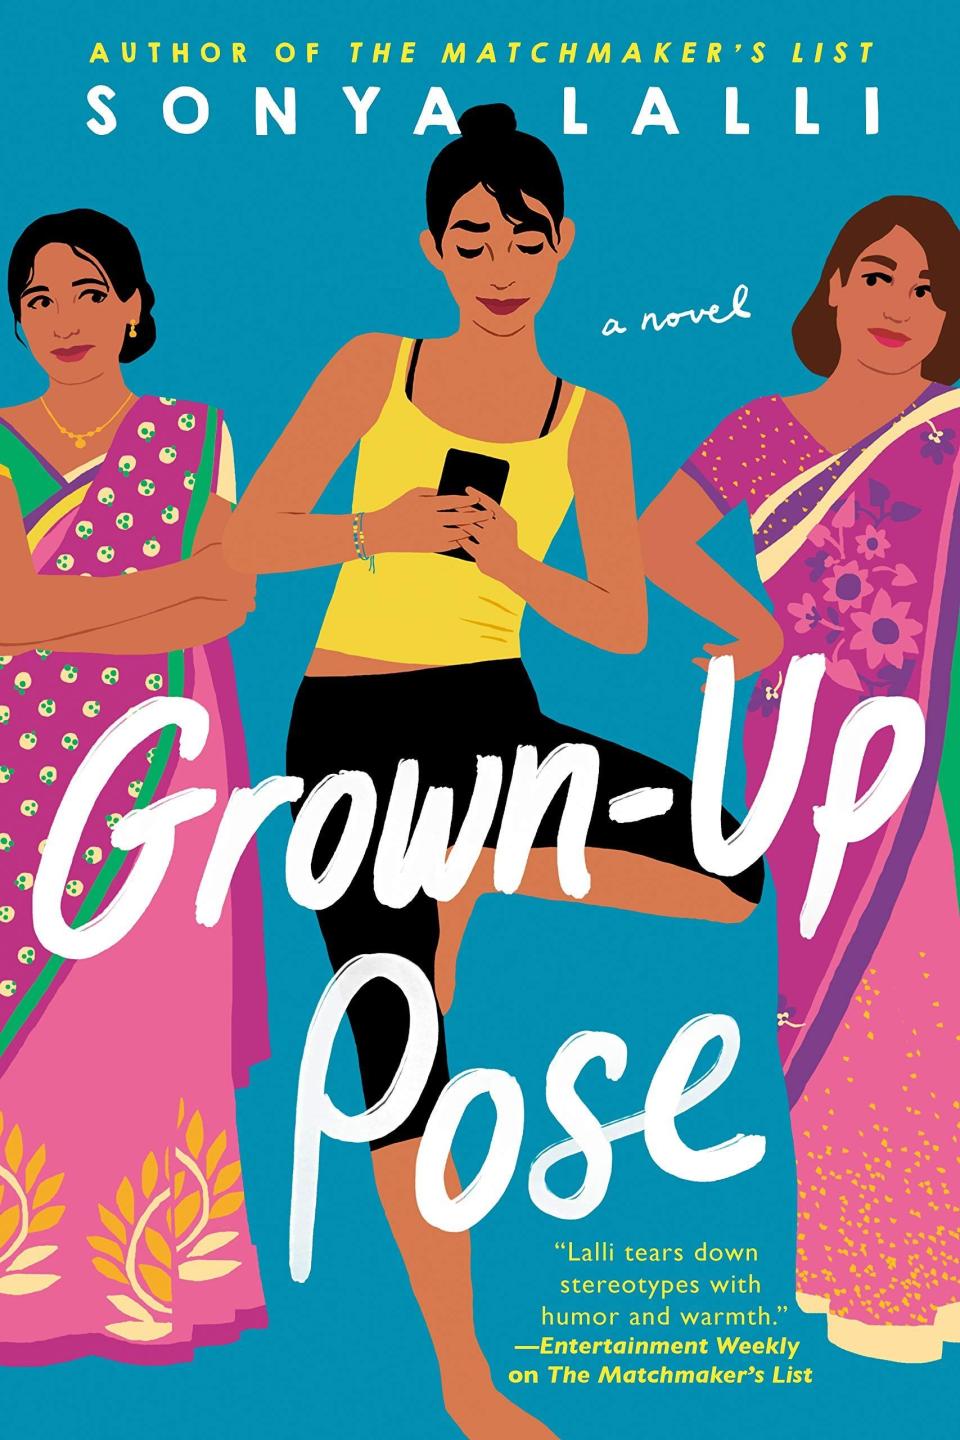 41) ‘Grown-Up Pose’ by Sonya Lalli